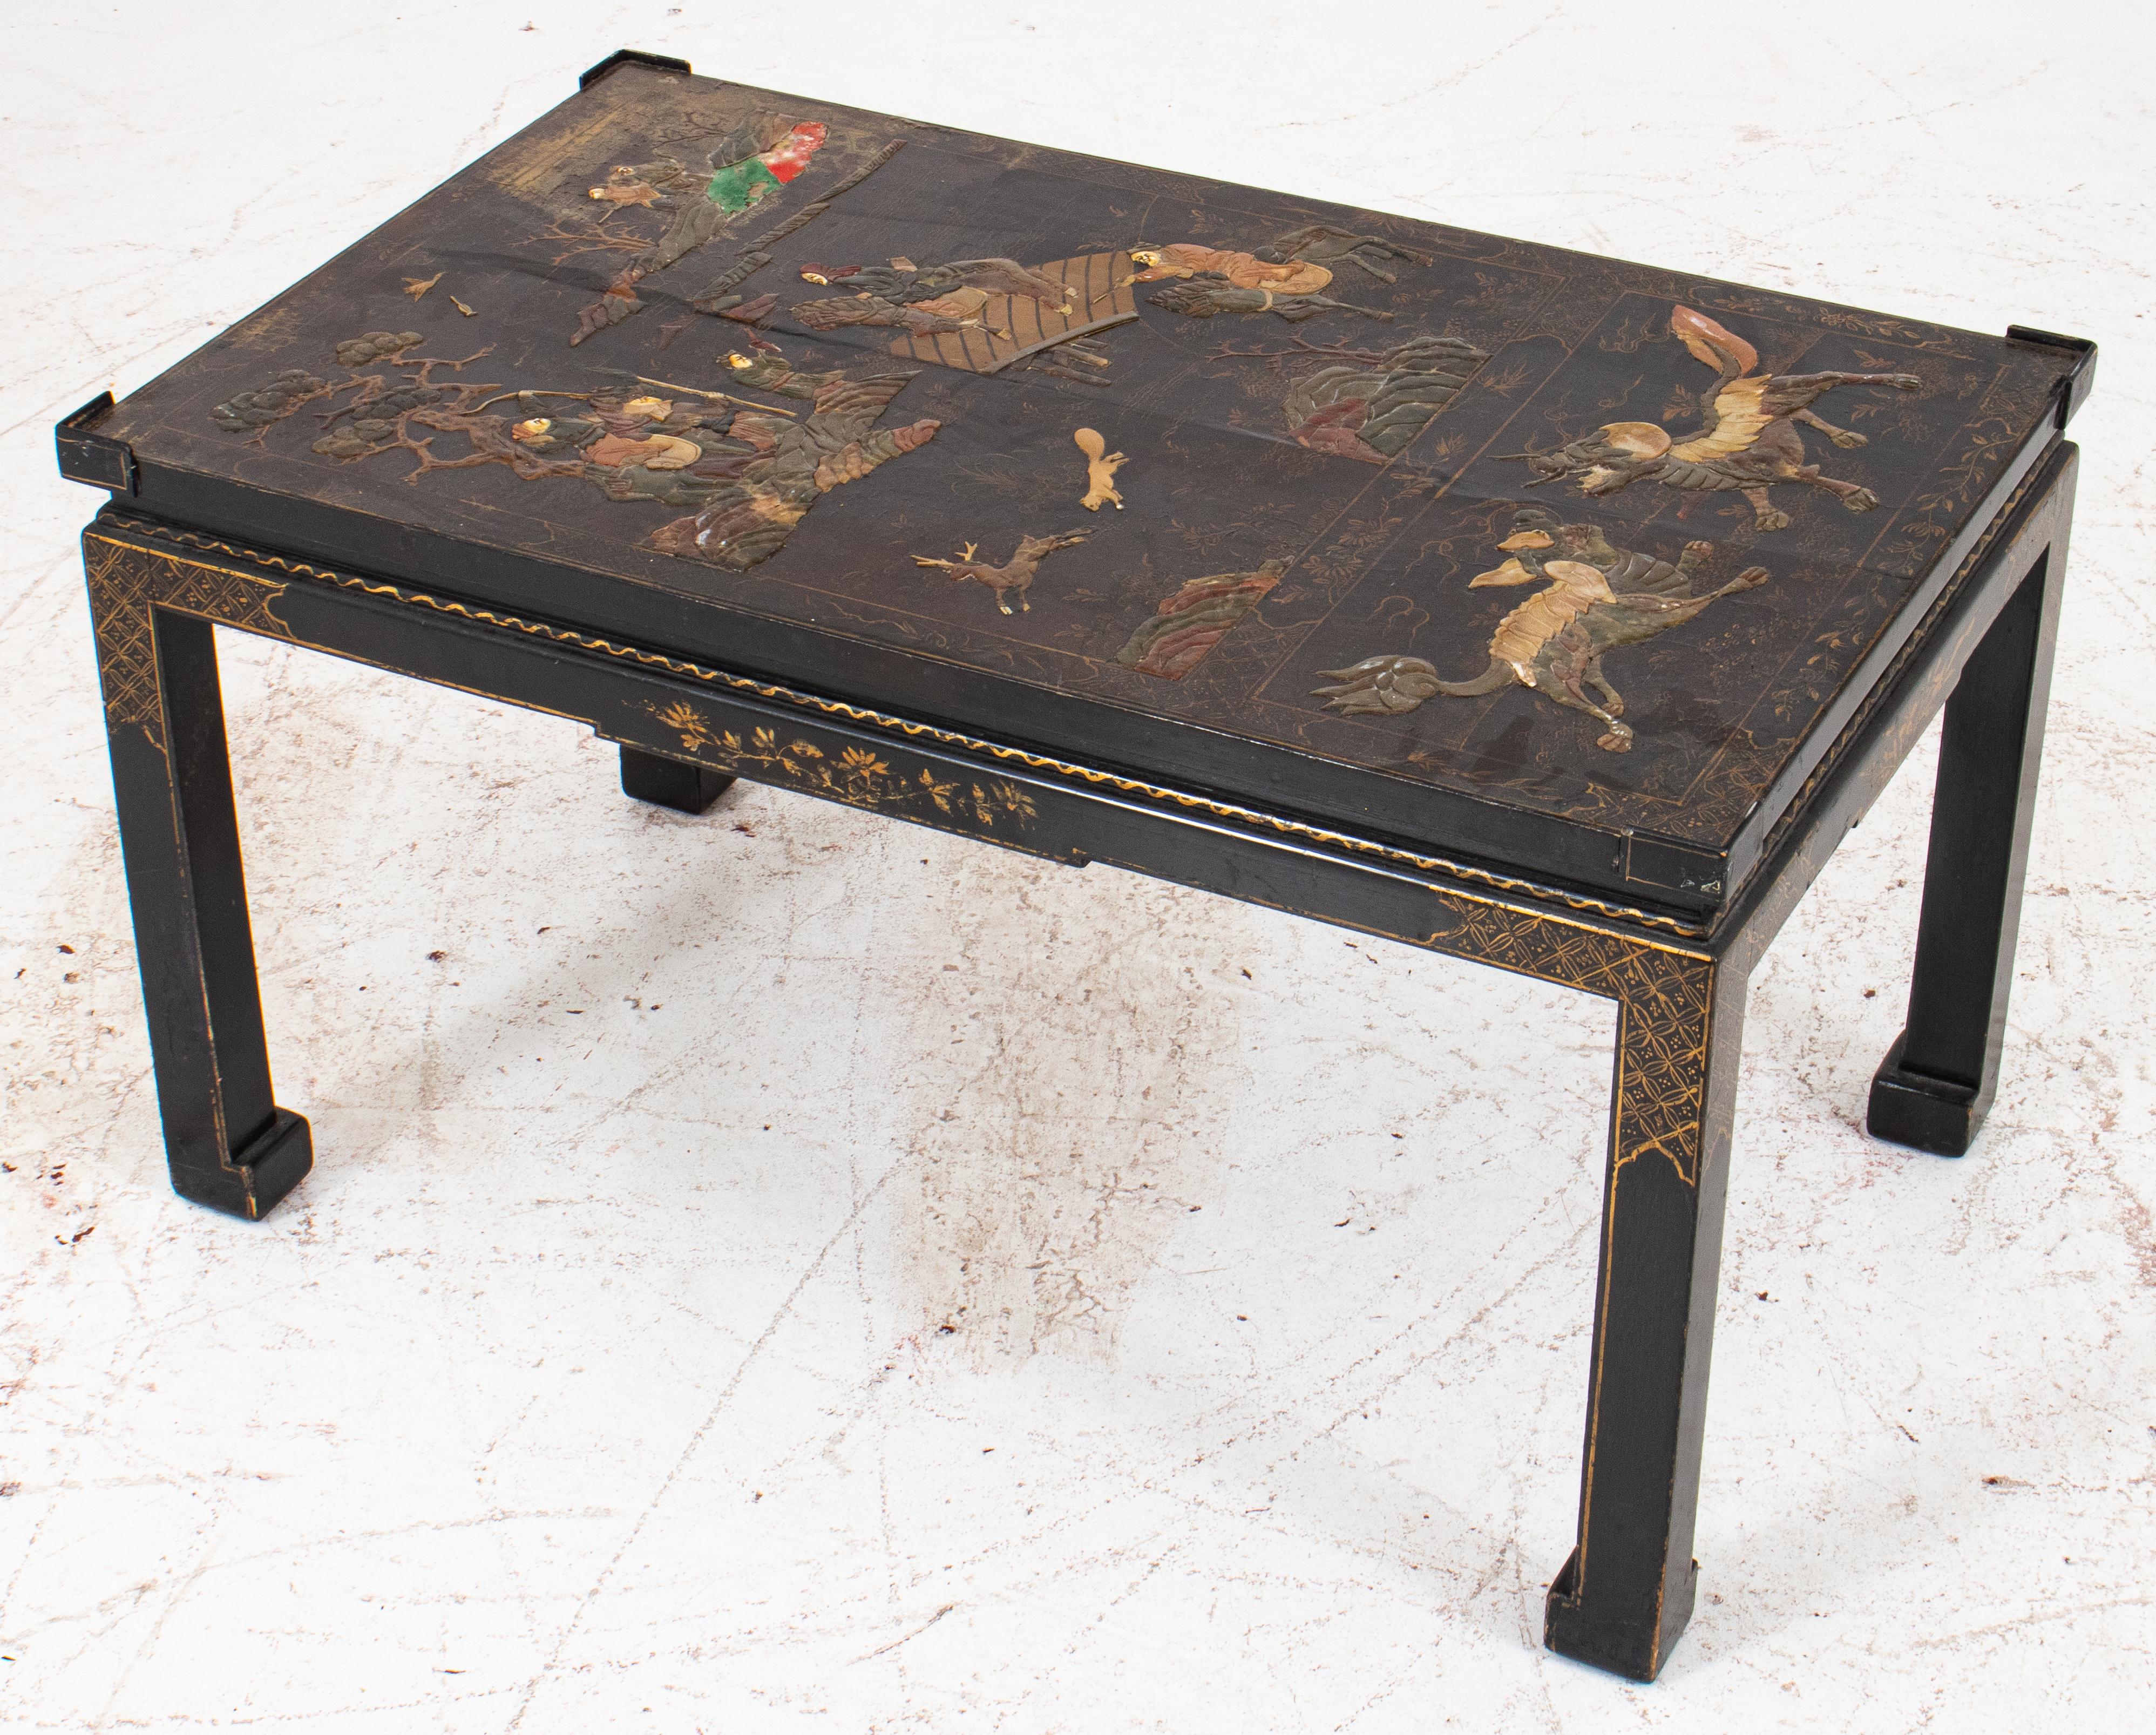 19th Century Chinese Hardstone Inlaid Panel Mounted as a Table